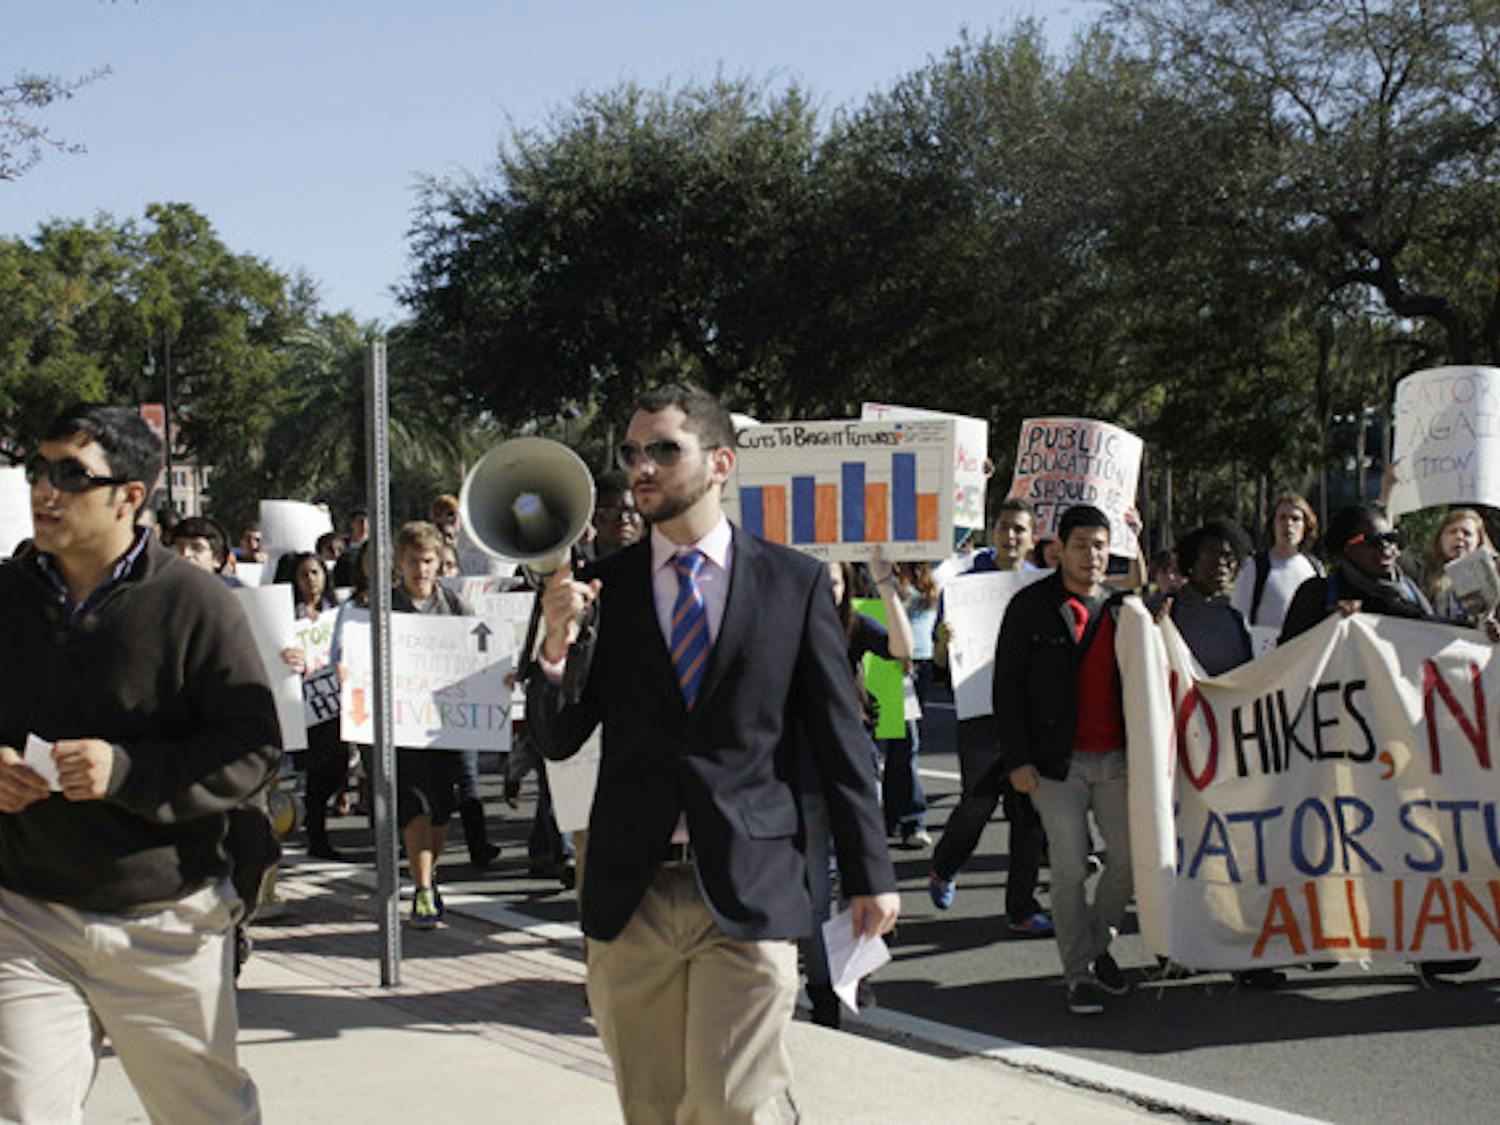 Jose Soto, a fourth-year Ph.D. candidate in food and resource economics, 31, left, and anthropology junior Robbey Hayes, 22, right, lead a group of about 60 protesters to Emerson Alumni Hall, where the UF Board of Trustees met Thursday. They rallied against tuition and fees increases.